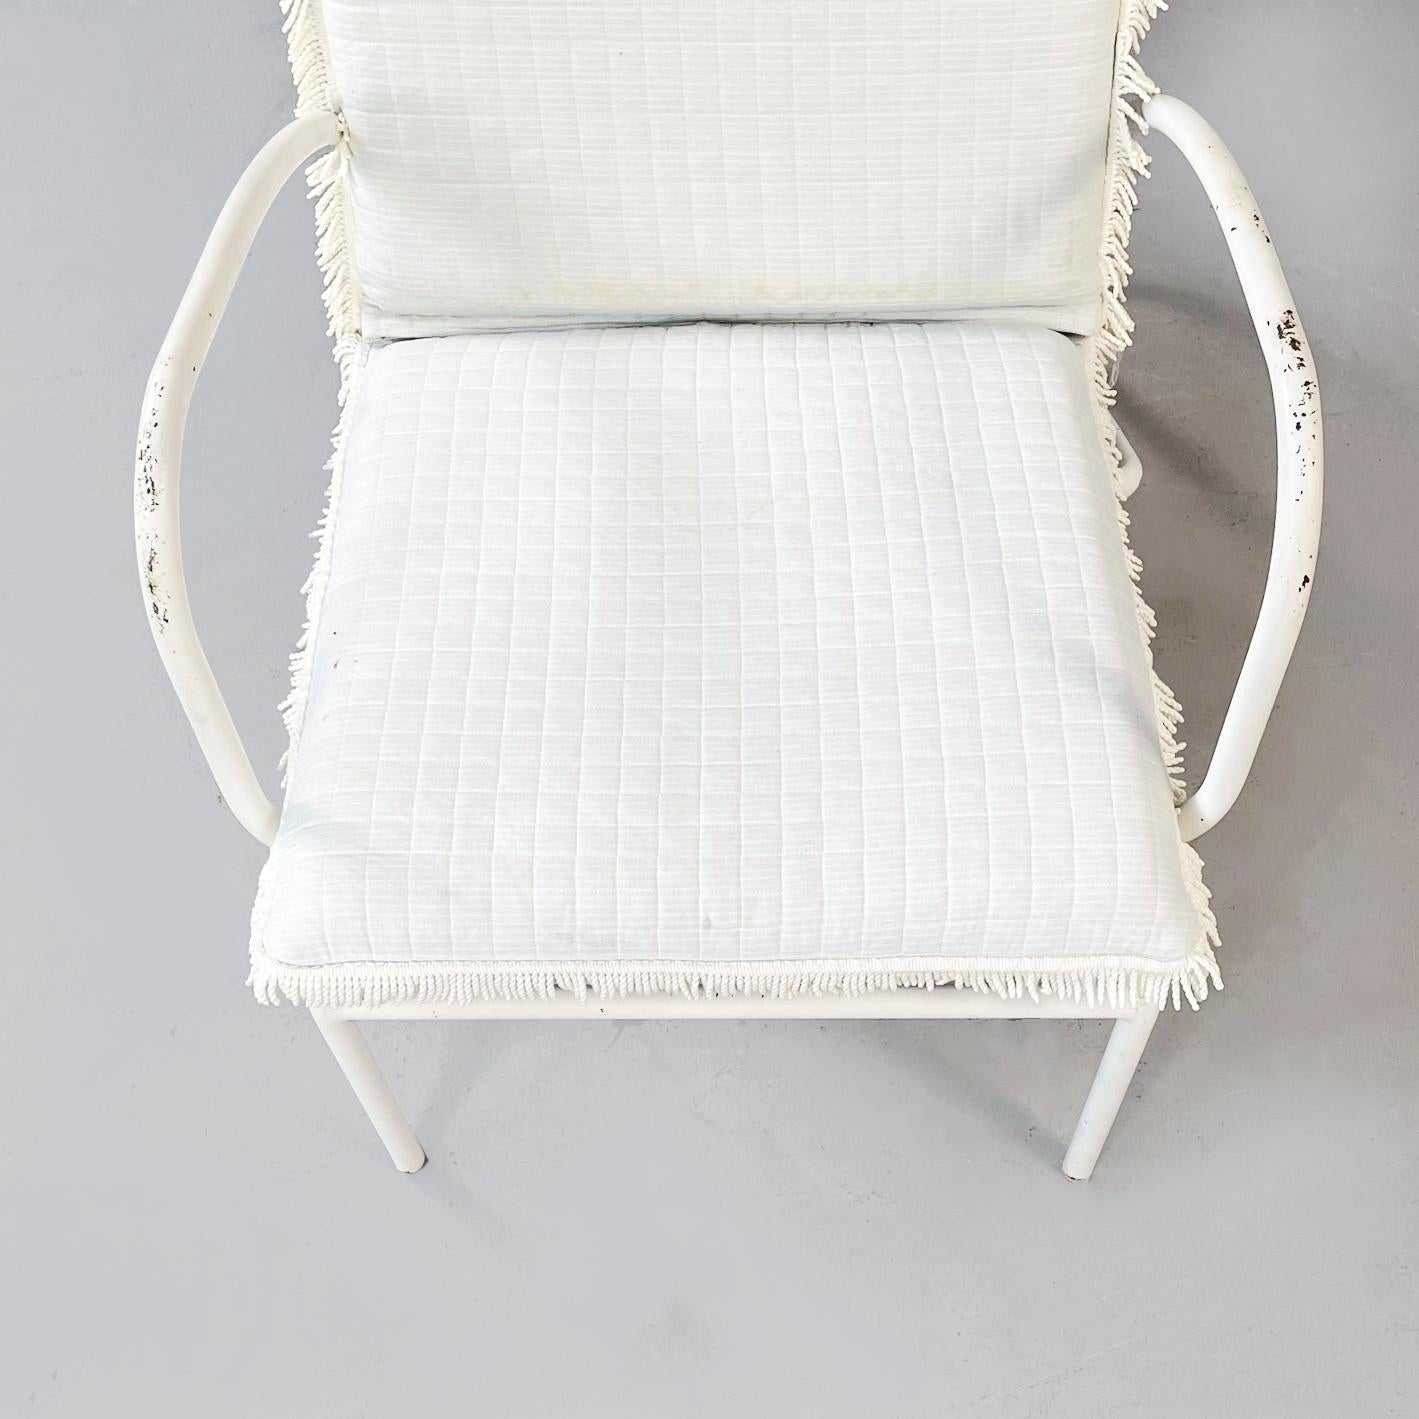 Italian Mid-Century White Iron Garden Armchairs with Fabric Cushions, 1960s For Sale 1